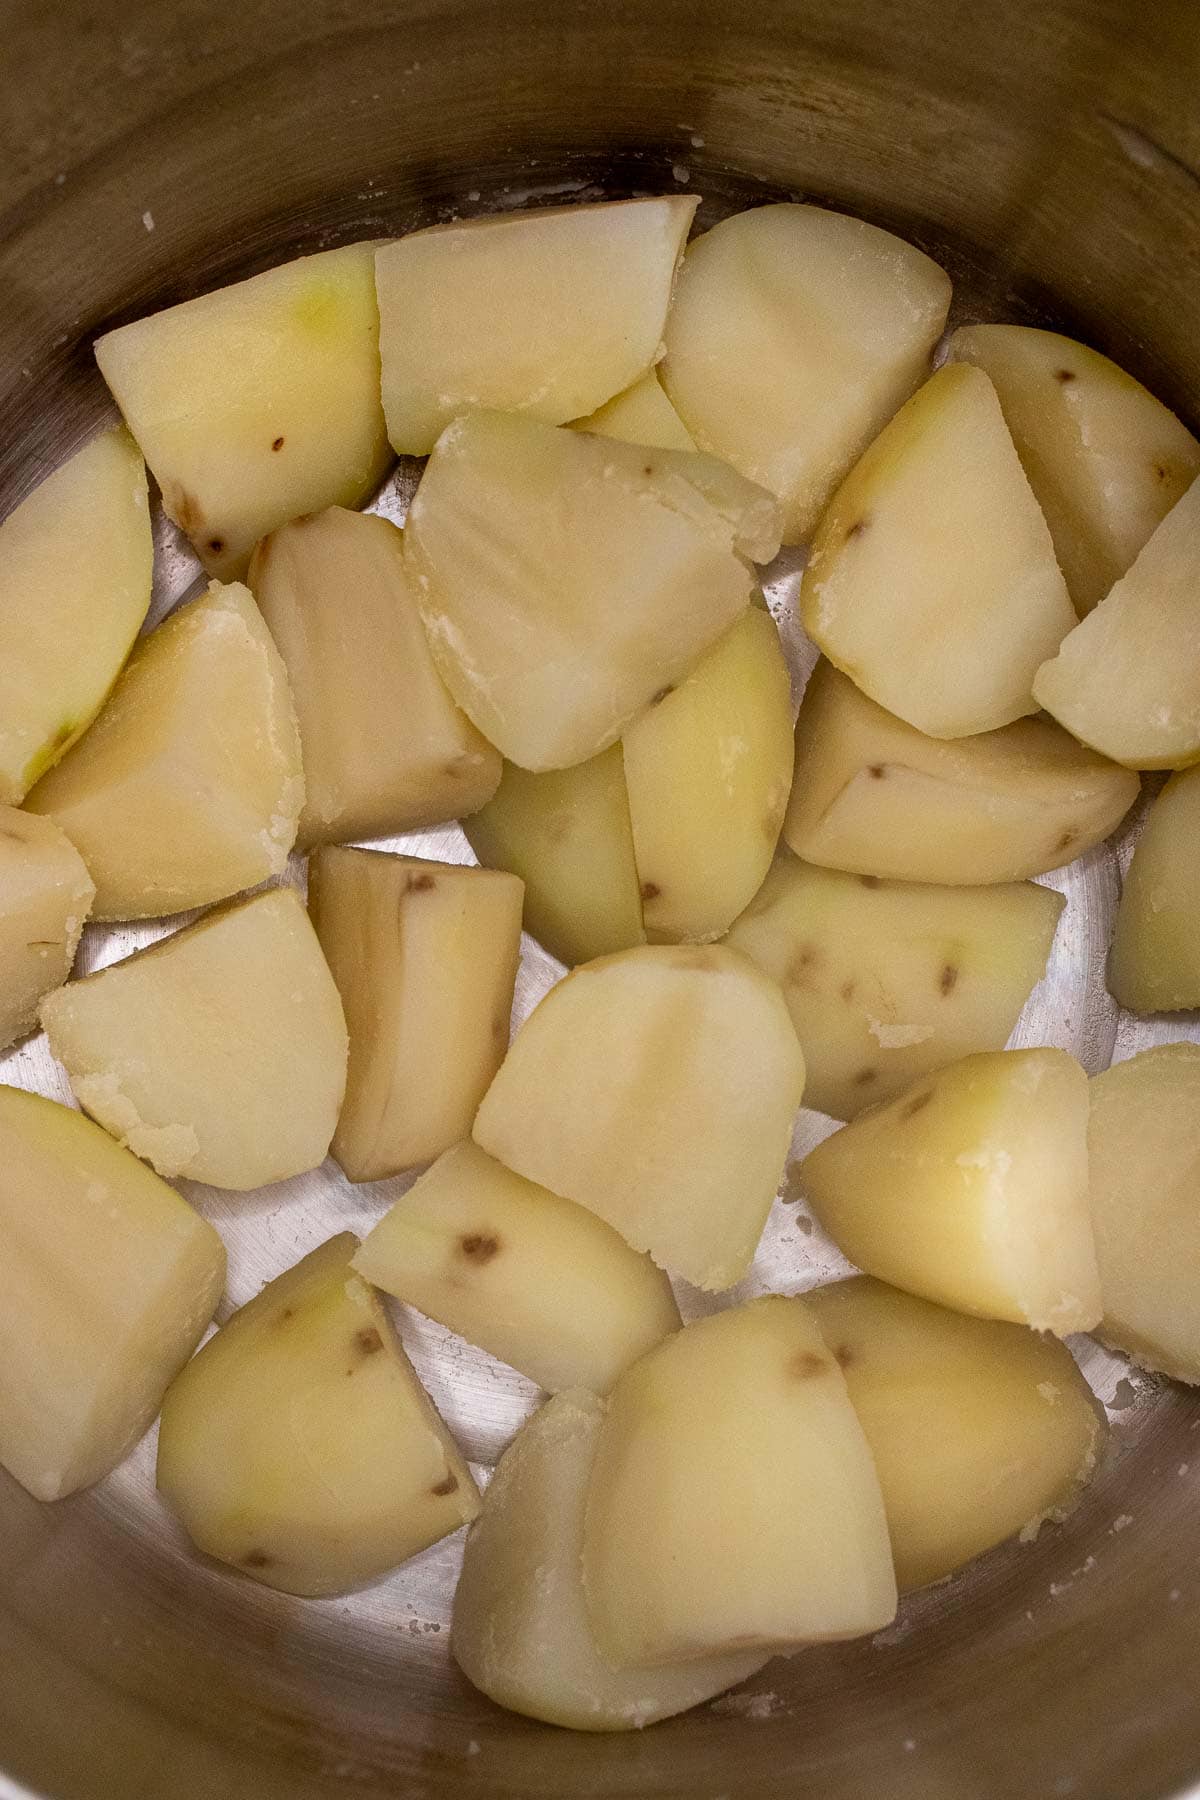 Parboiled potatoes drained and added back to pot to dry out some.